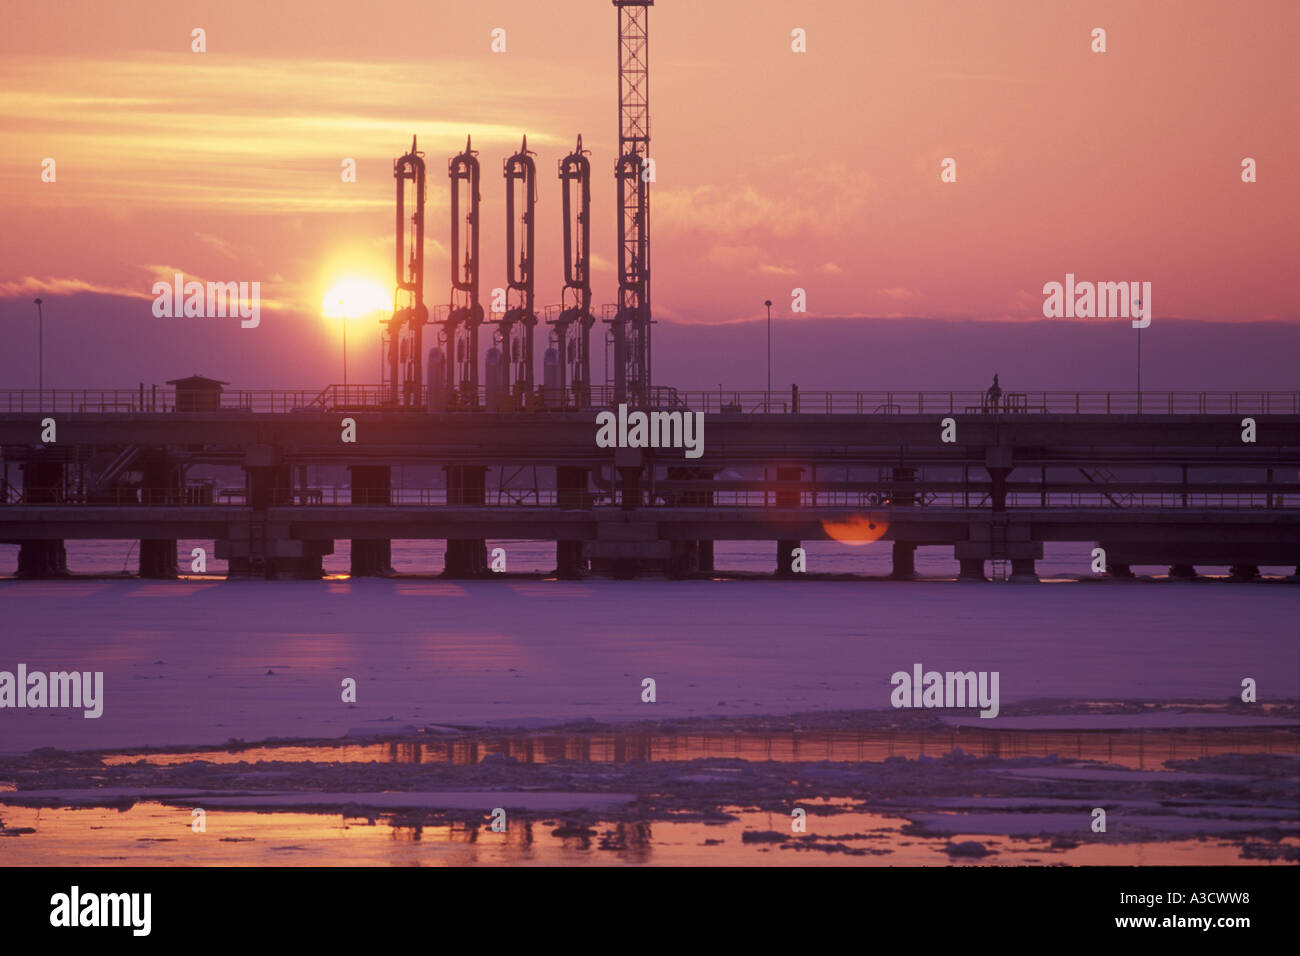 Russia's Transneft crude oil loading terminal in Primorsk, Gulf of Finland,1st Russian own export terminal in Baltic area after USSR, opend 27.12 2001 Stock Photo